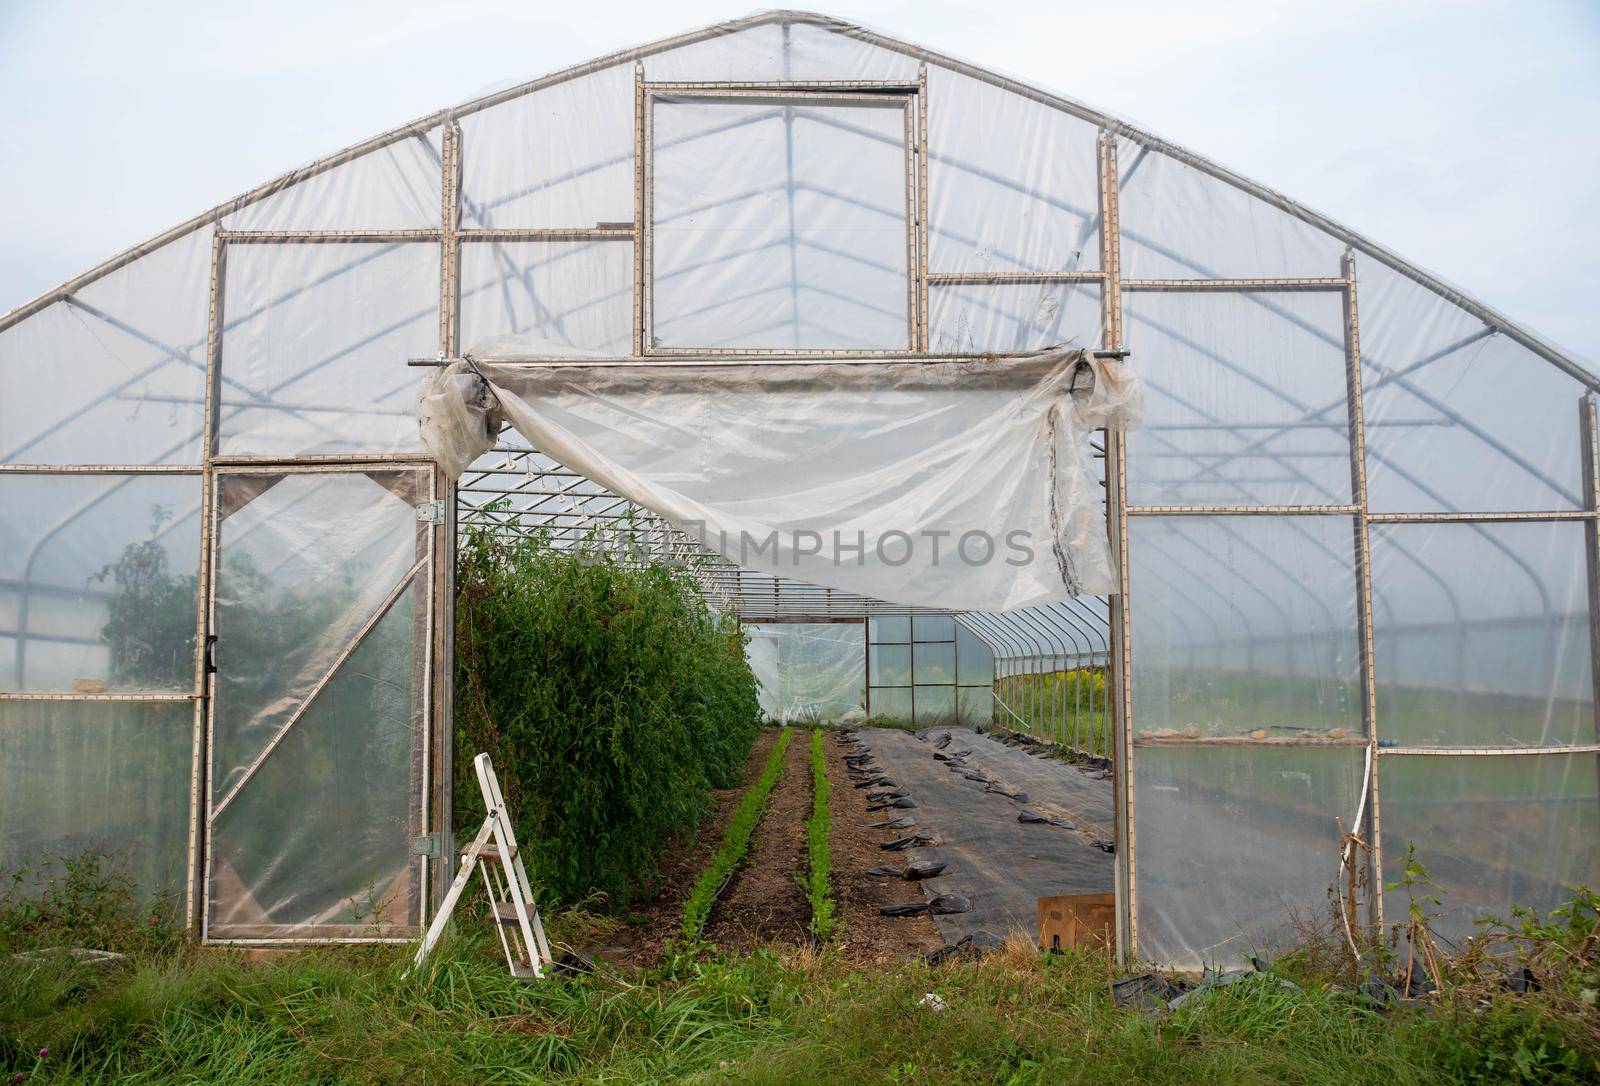 View of greenhouse structure and open door with green vegetable plants inside by marysalen